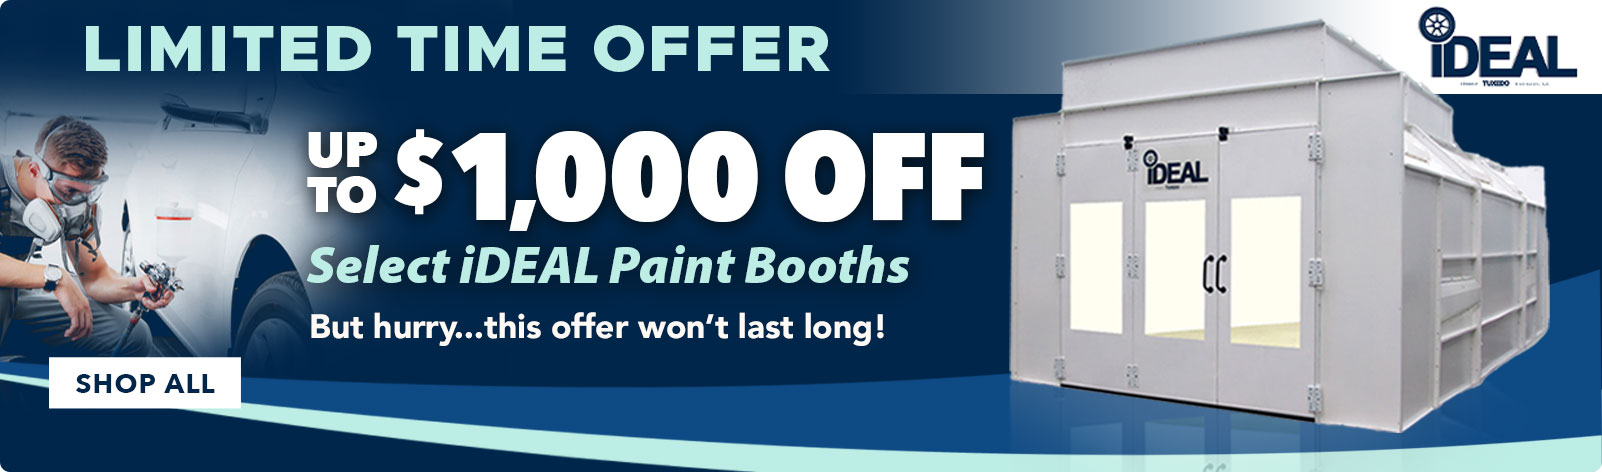 Up to $1000 Off Select iDEAL Paint Booths